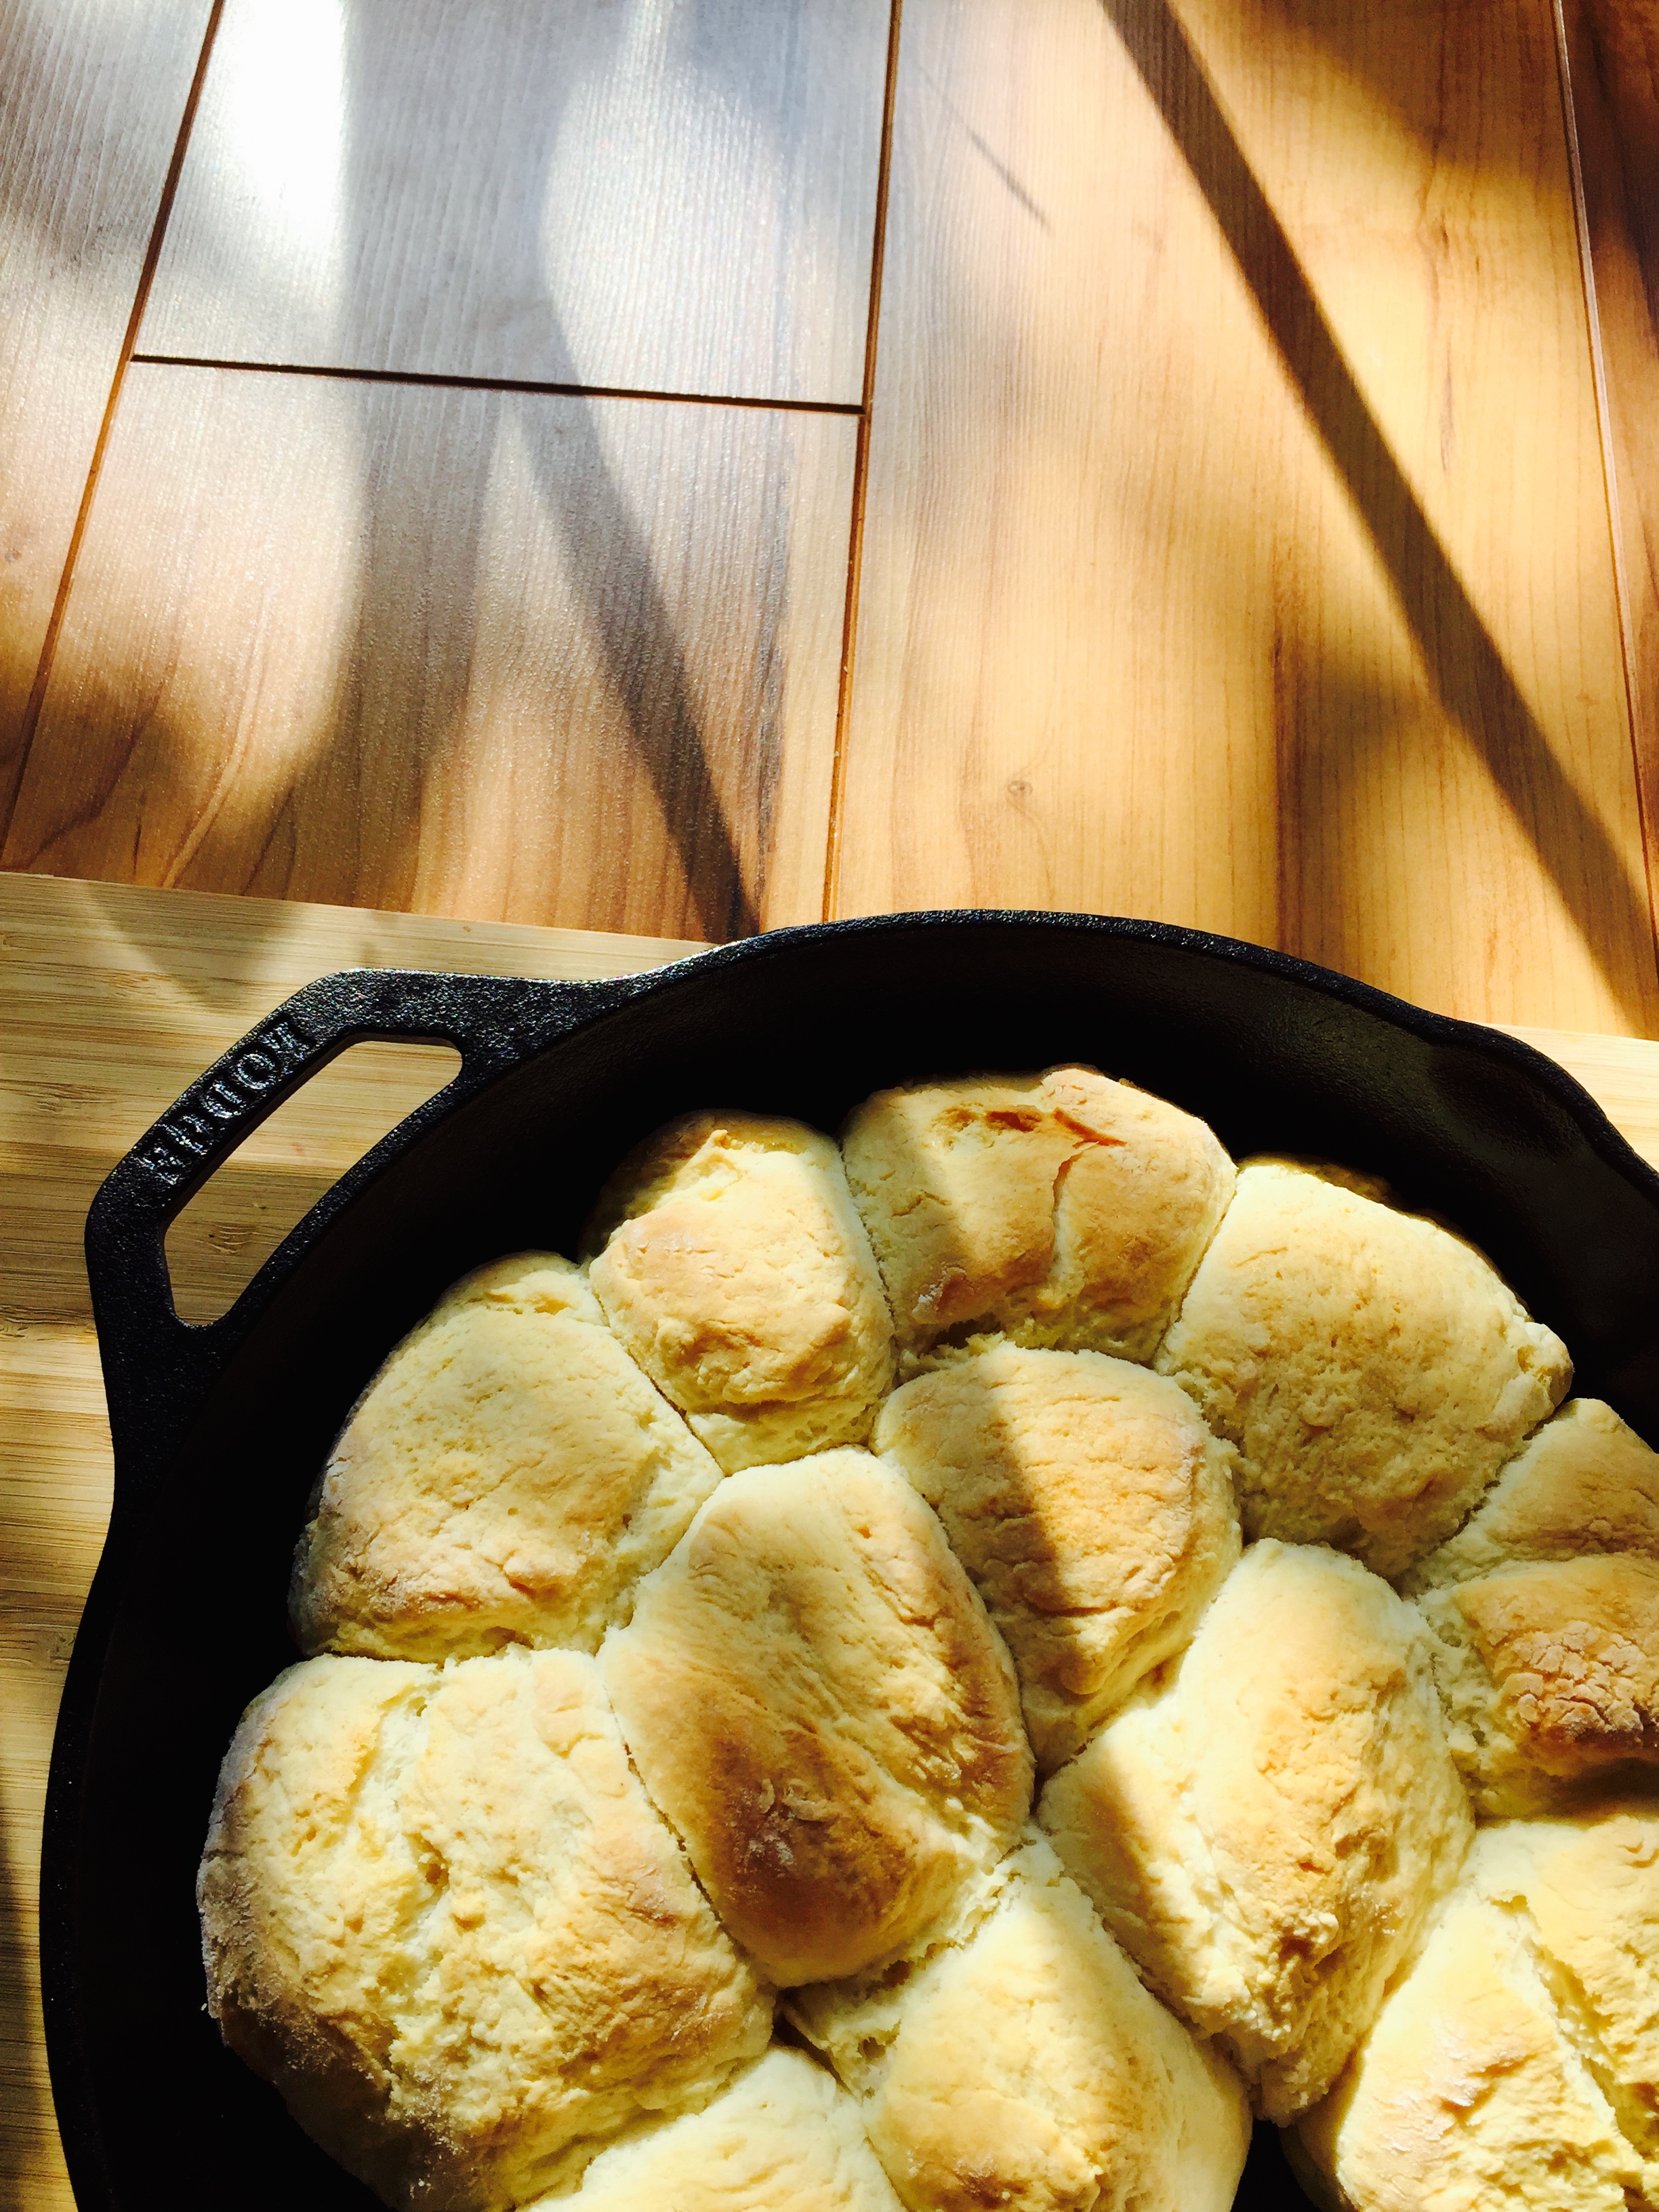 Biscuits in a pan.